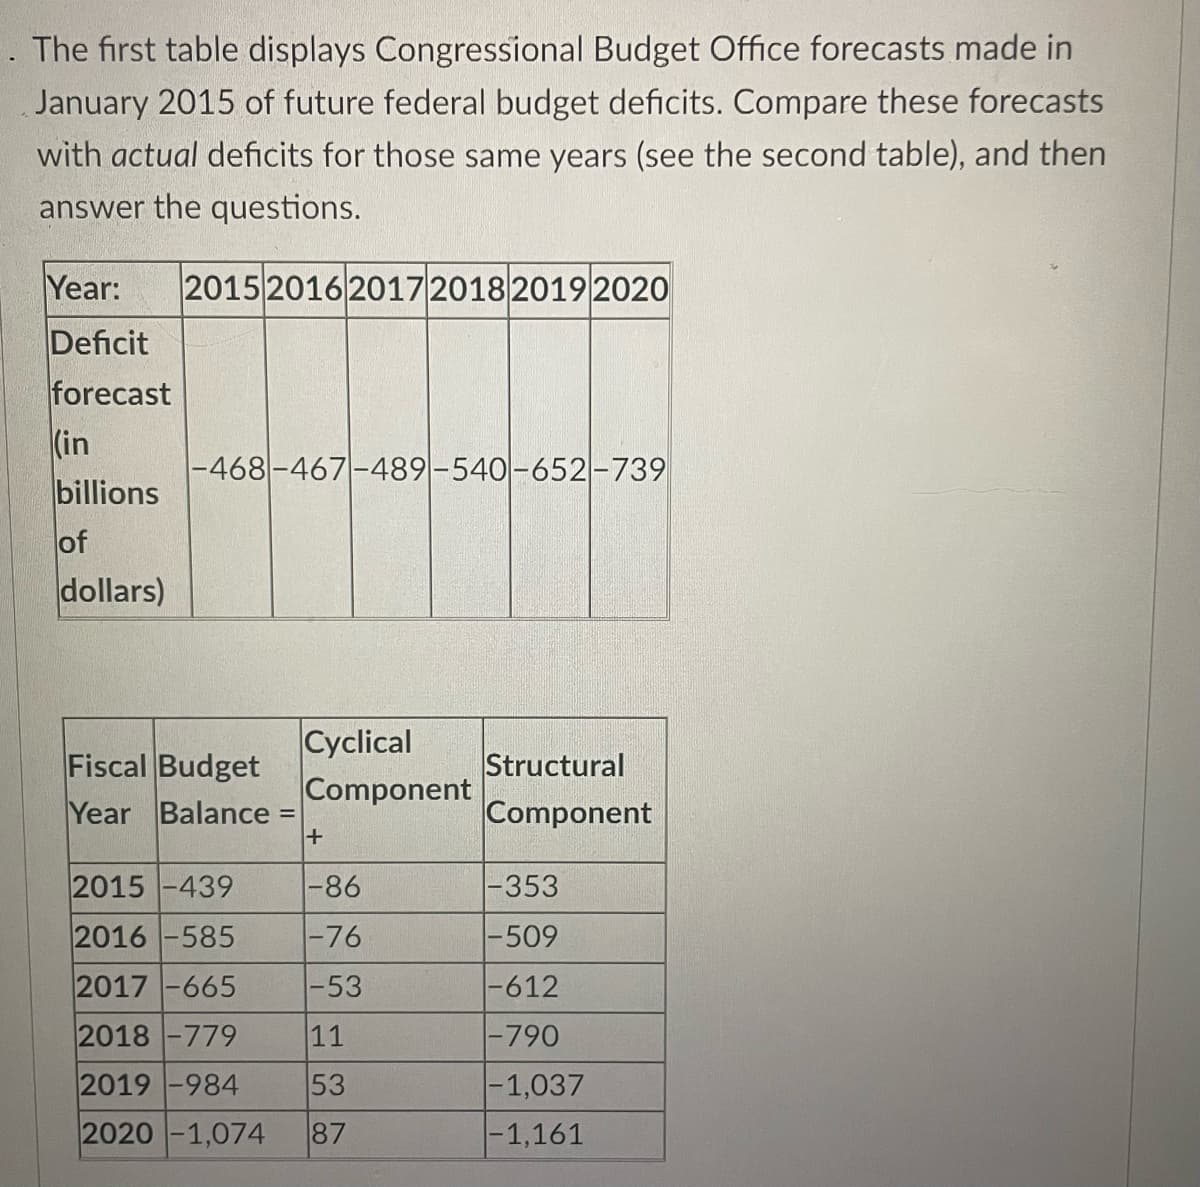 The first table displays Congressional Budget Office forecasts made in
January 2015 of future federal budget deficits. Compare these forecasts
with actual deficits for those same years (see the second table), and then
answer the questions.
Year: 2015 2016 2017 2018 2019 2020
Deficit
forecast
(in
billions
of
dollars)
-468-467-489-540-652-739
Fiscal Budget
Year Balance =
2015 -439
2016 -585
-86
-76
-53
11
53
2020 -1,074 87
2017-665
2018 -779
Cyclical
Component
2019-984
+
Structural
Component
-353
-509
-612
|-790
-1,037
-1,161